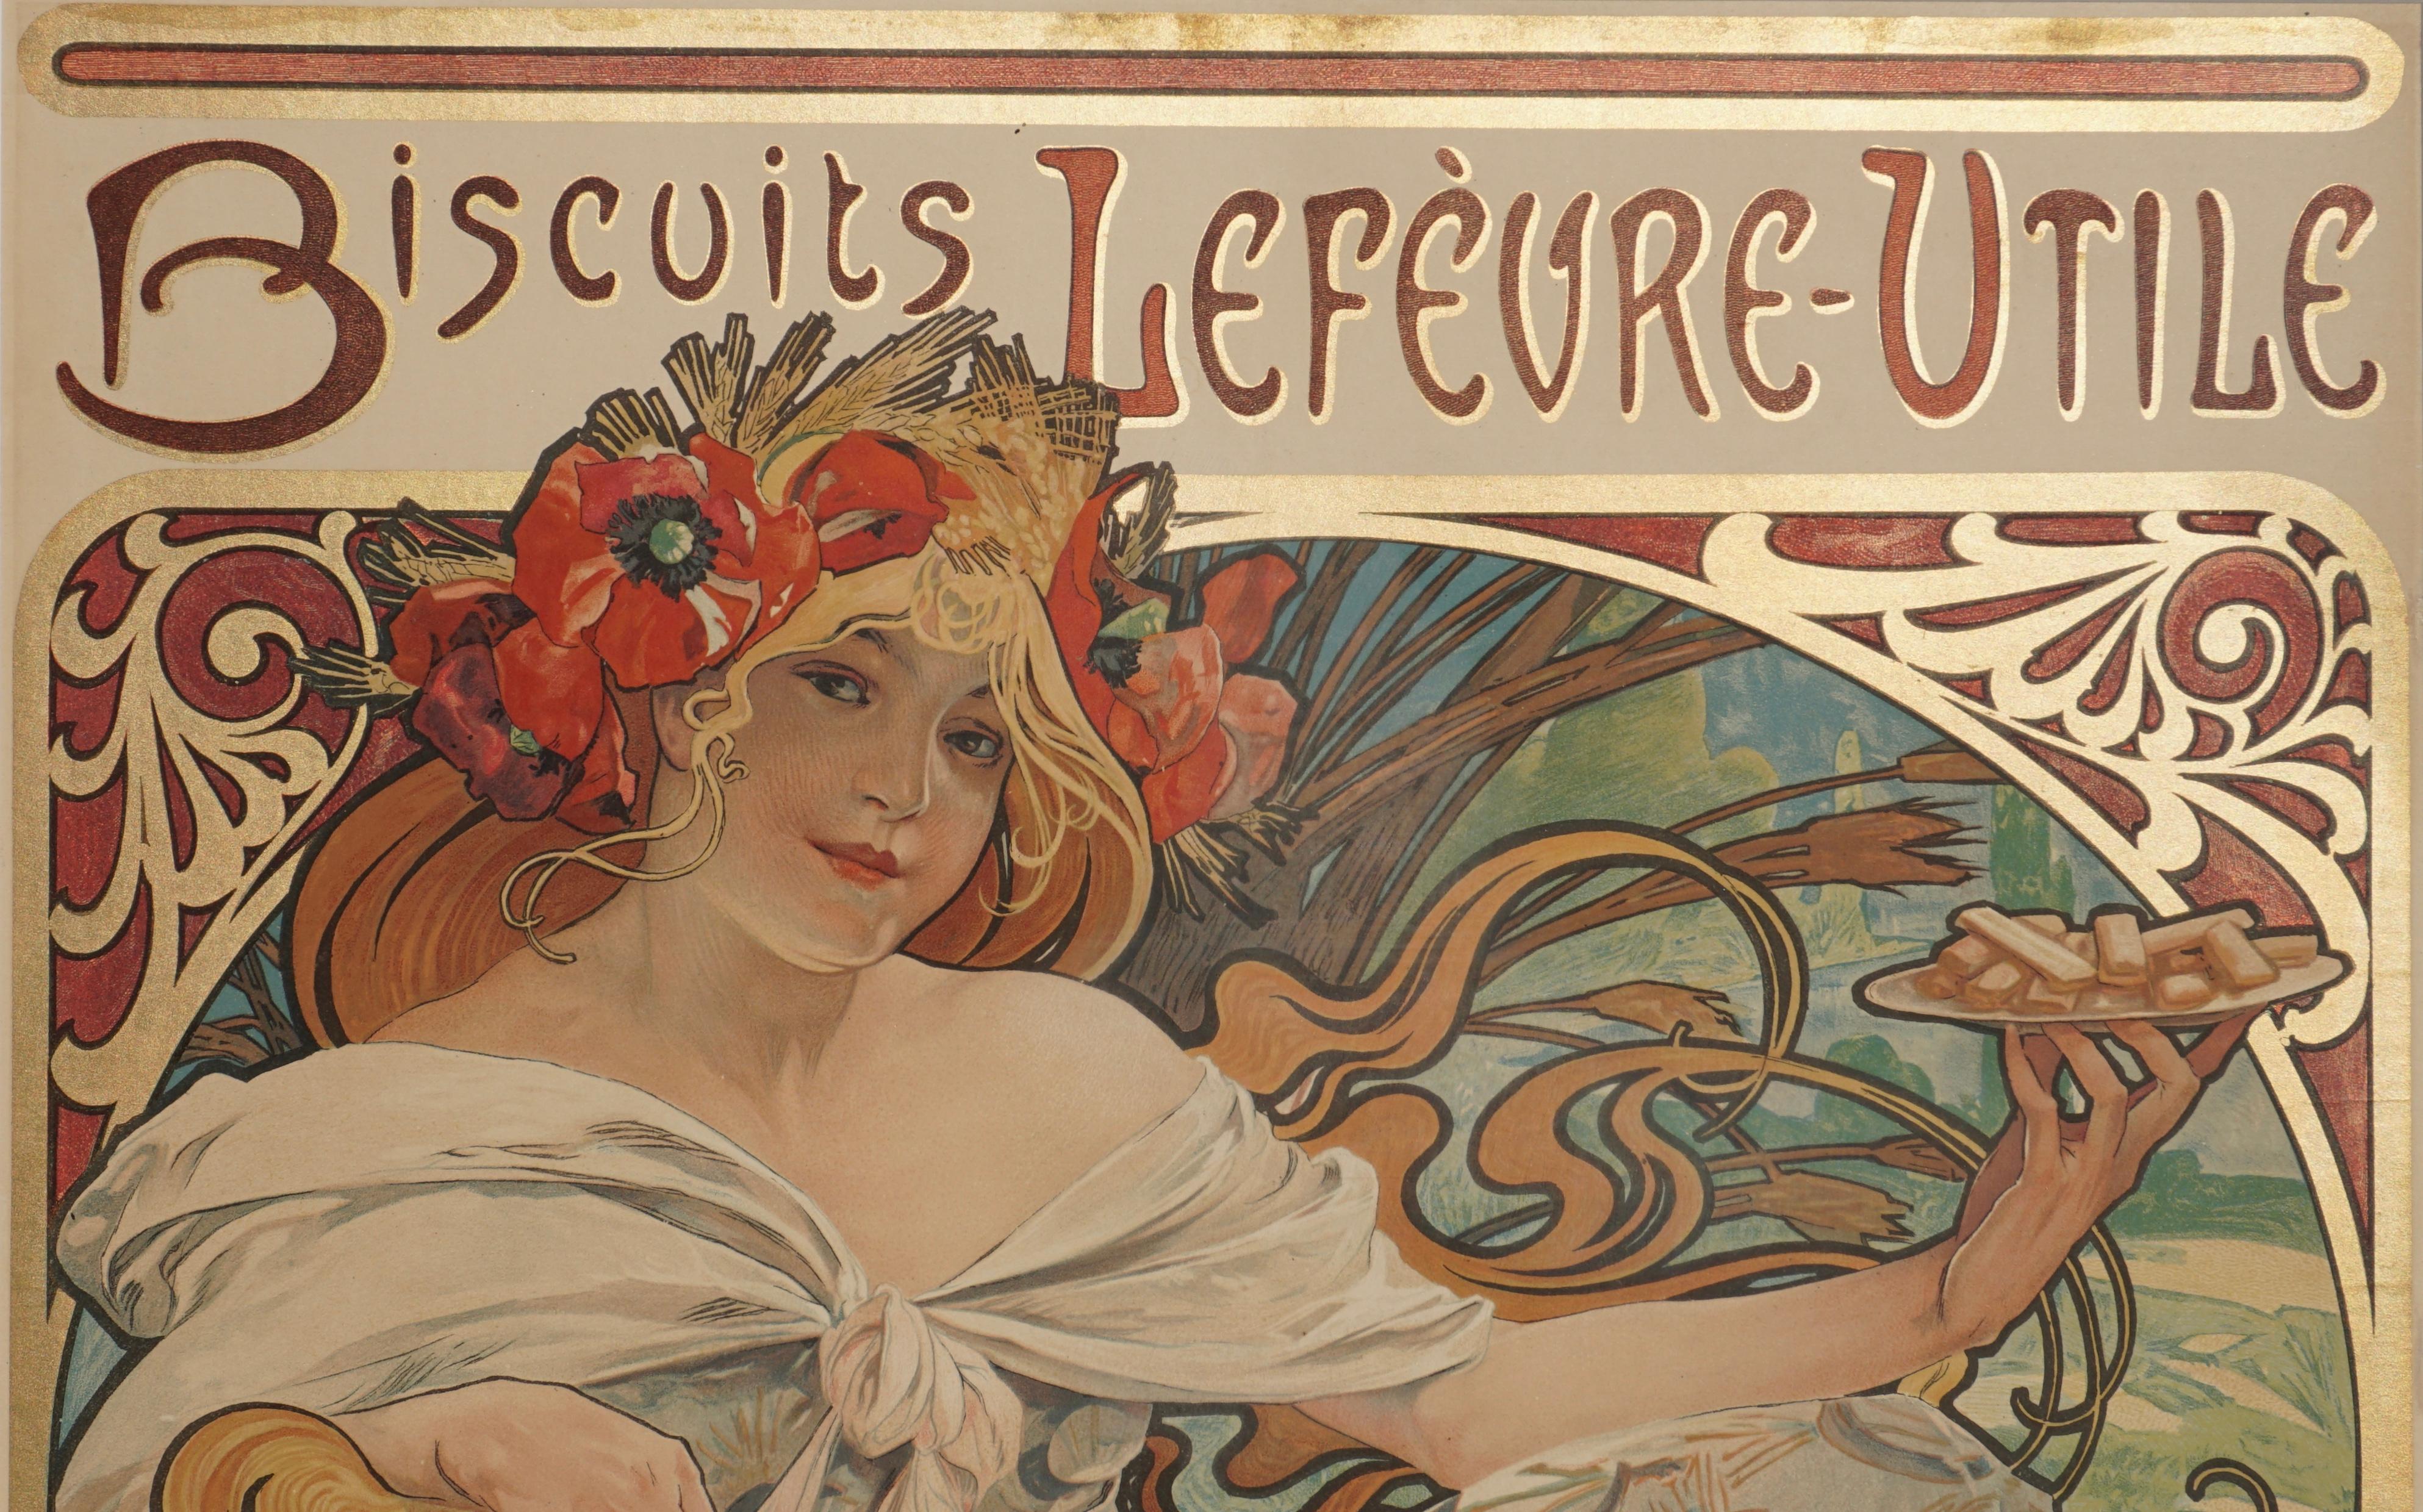 Paper Alphonse Mucha Biscuits Lefeure Utile Poster, 1897